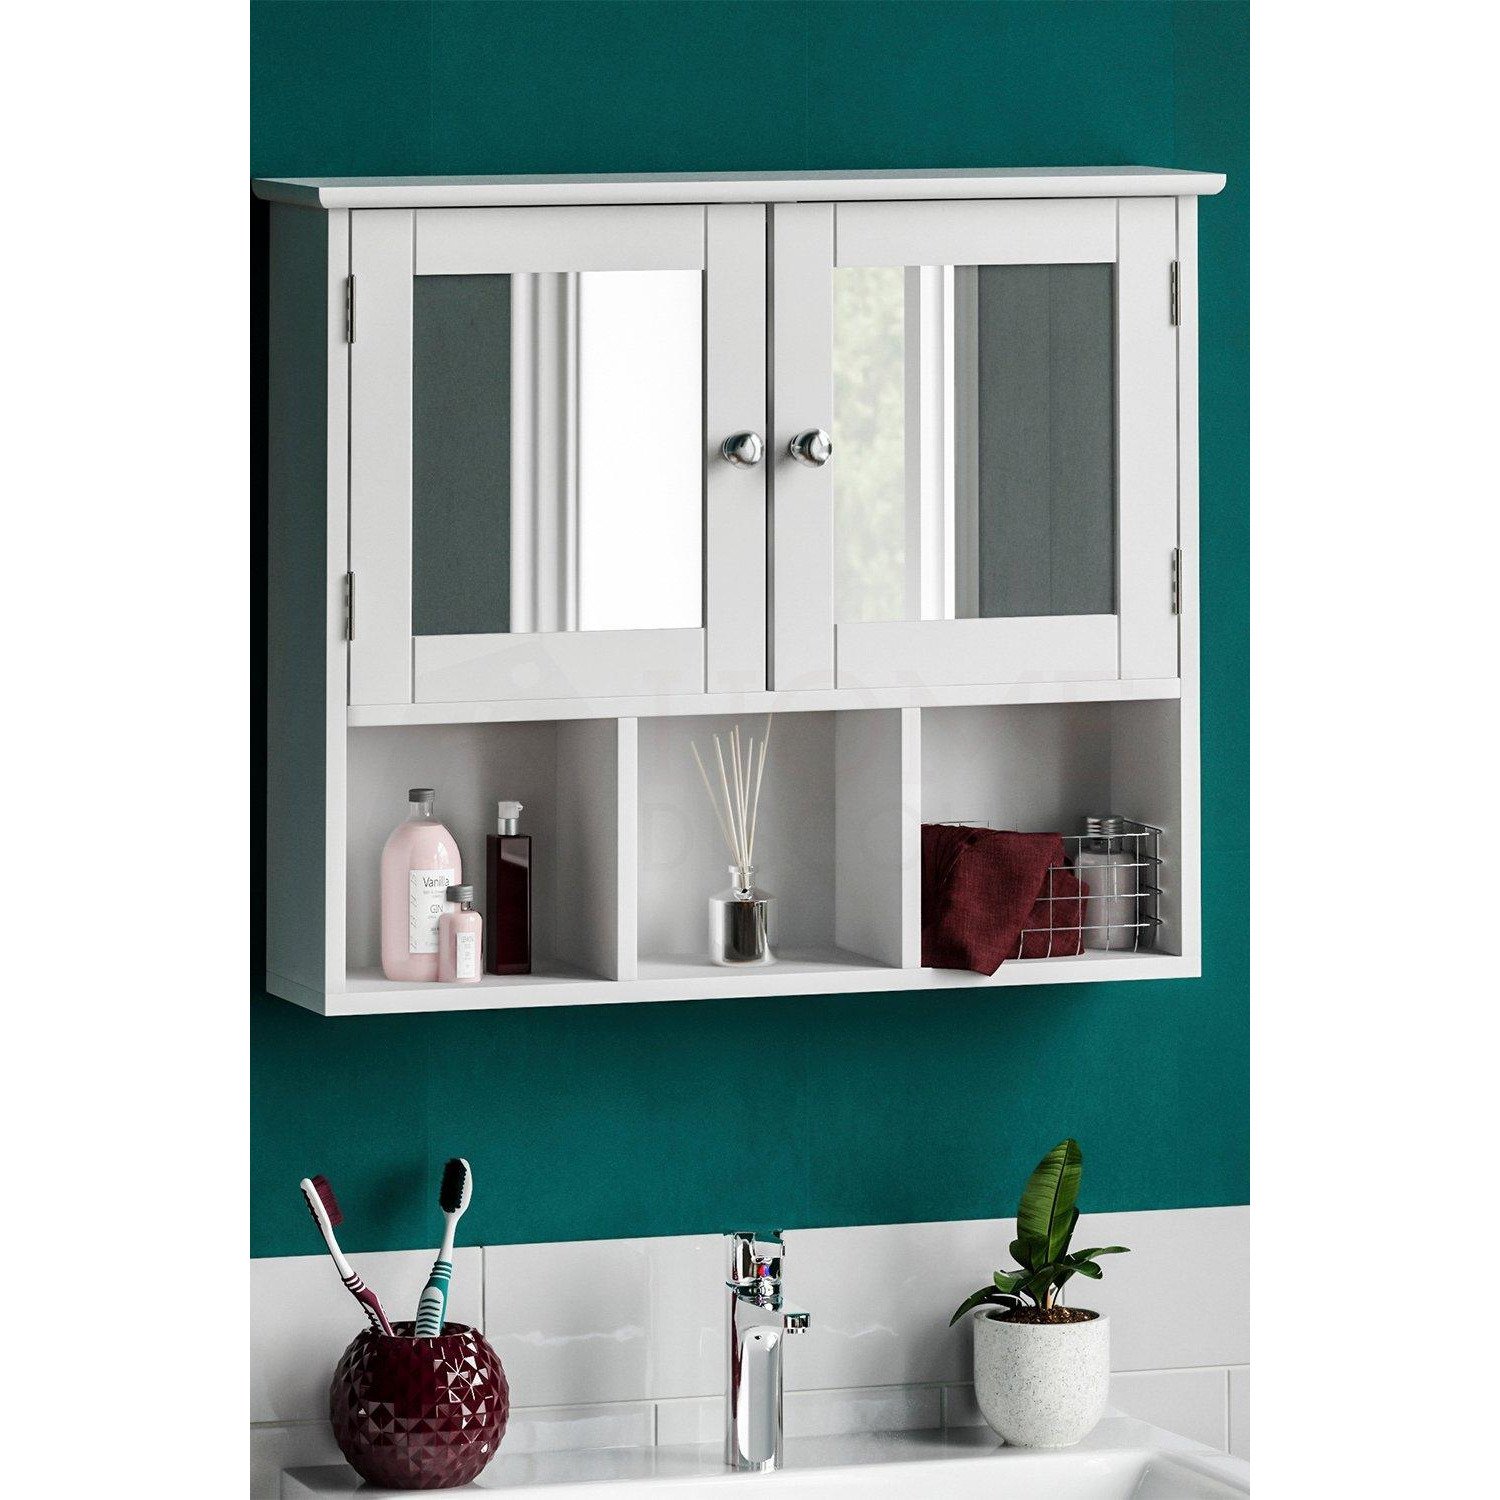 Bath Vida Priano 2 Door Mirrored Wall Cabinet With 3 Compartments Storage 500 x 600 x 140 mm - image 1